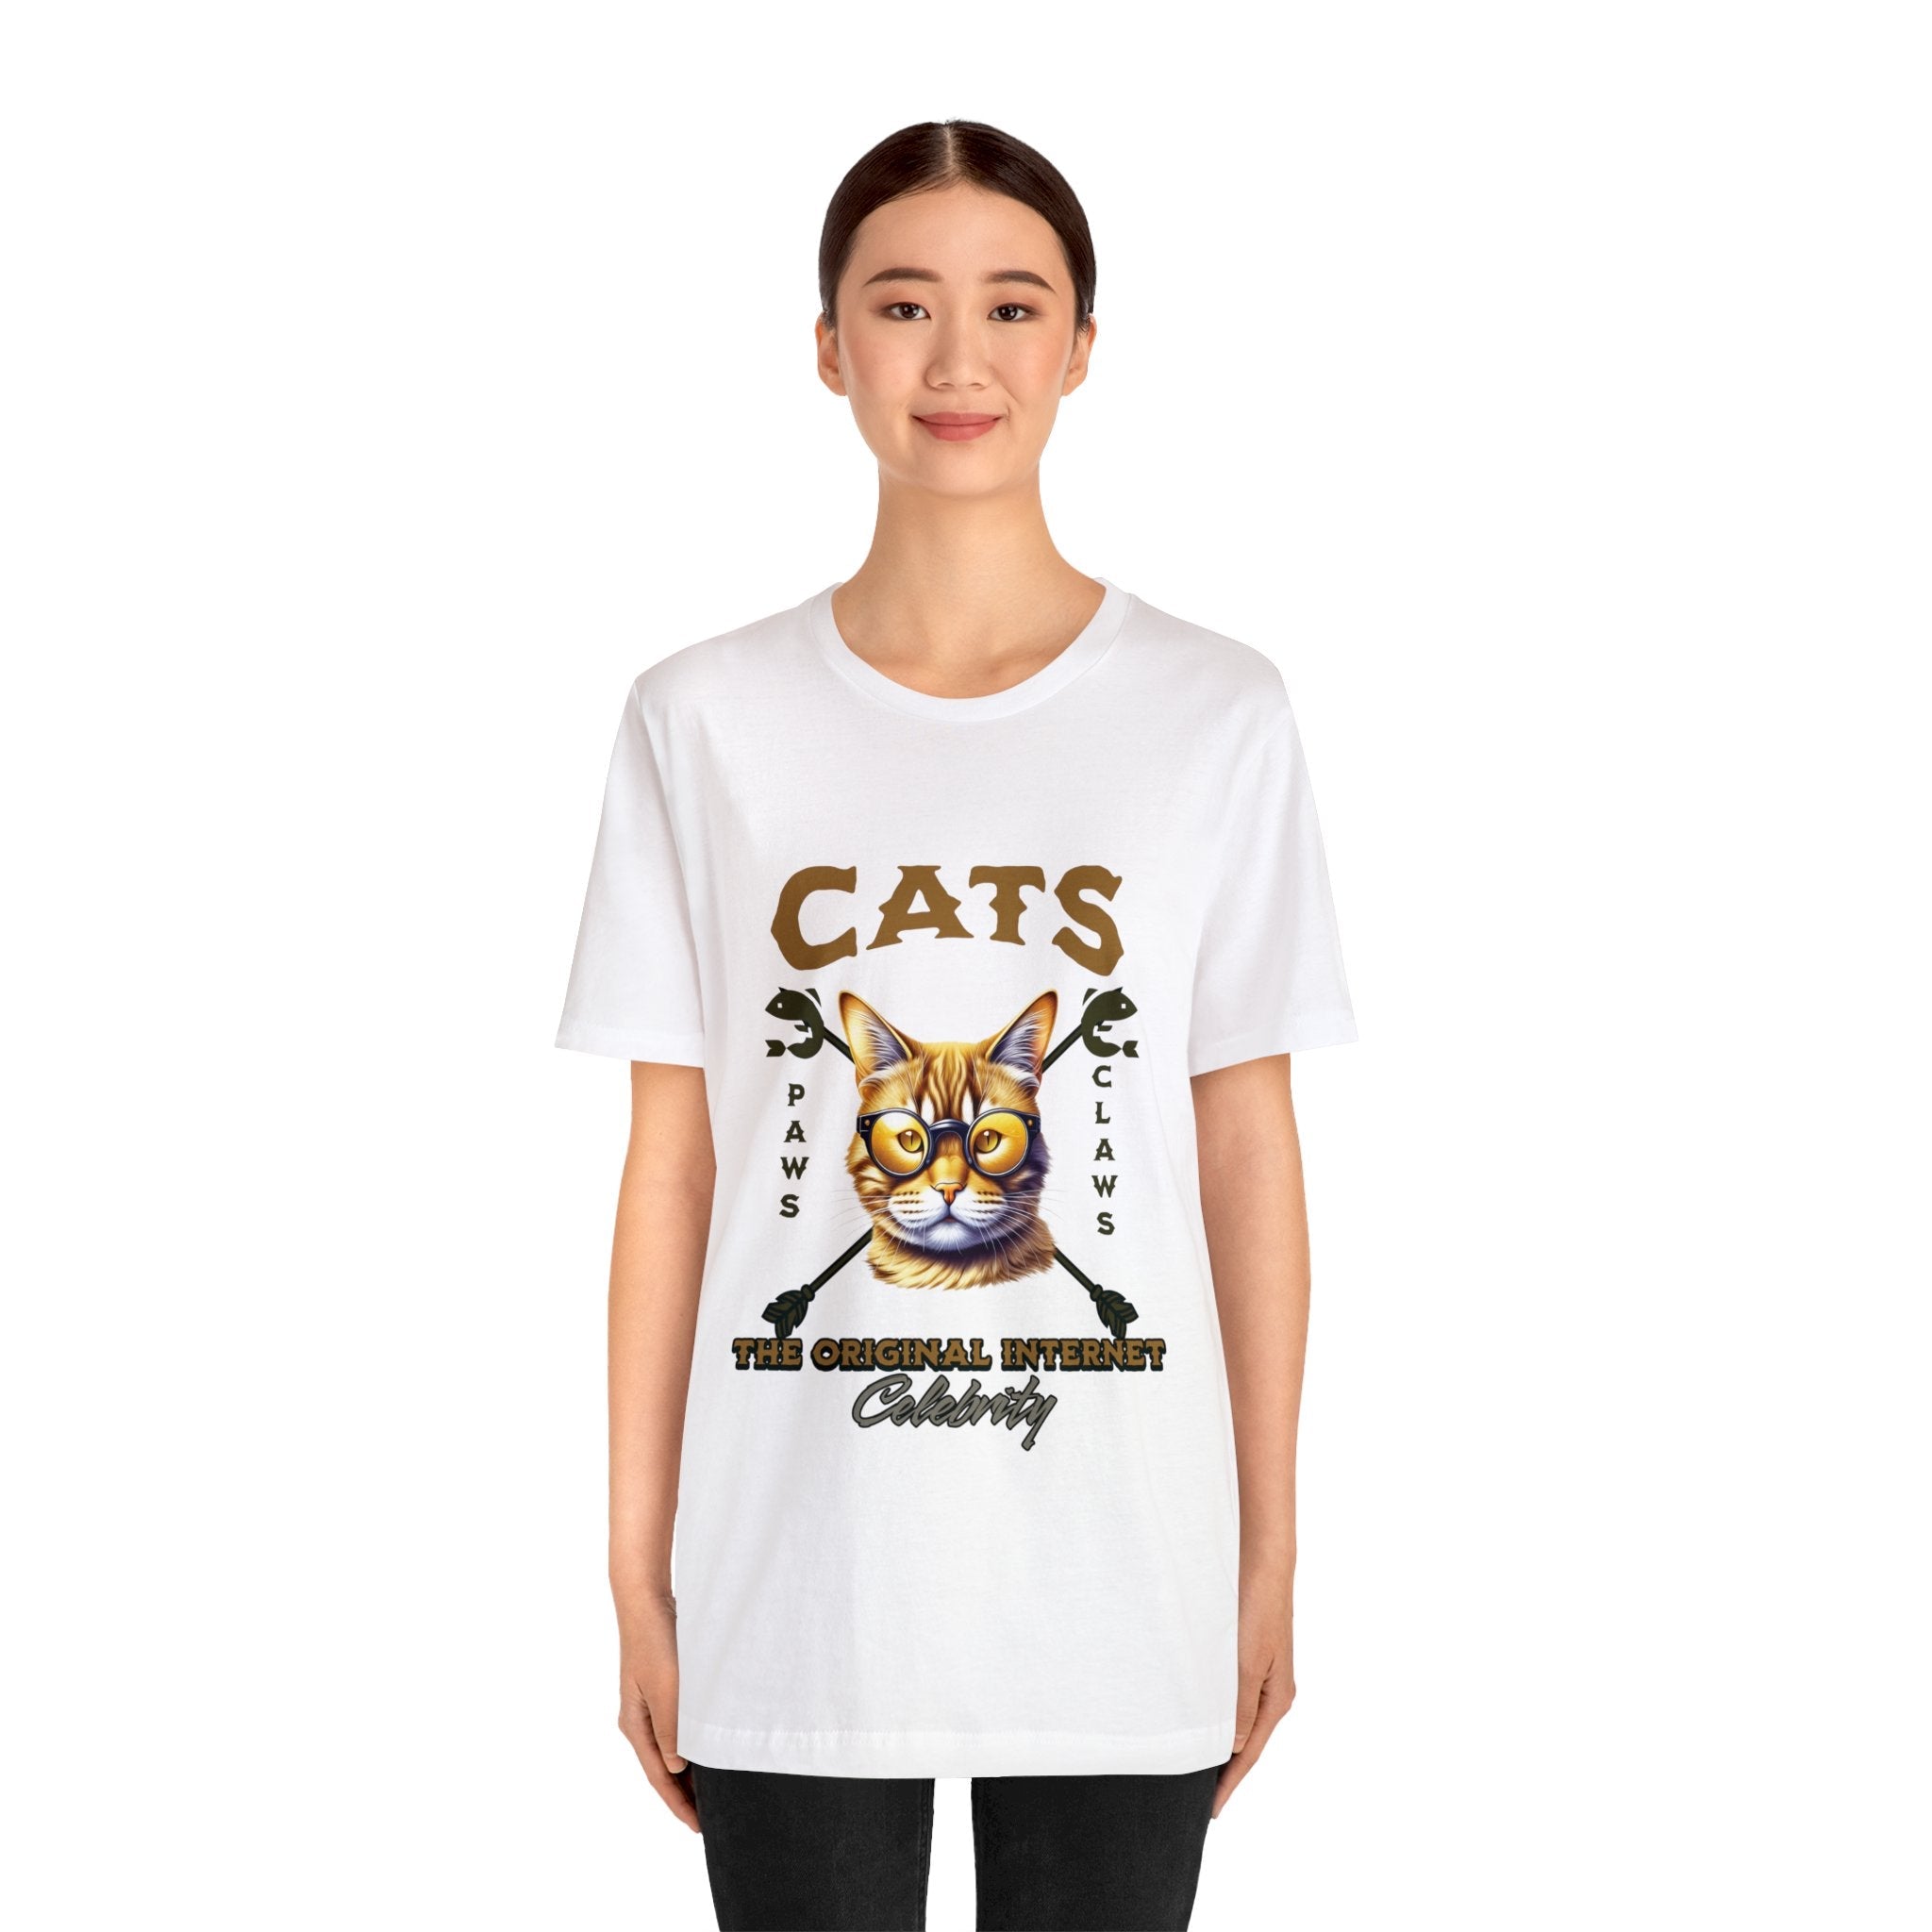 "Cats: The Original Internet Celebrity" Unisex Tee - Pawsitively Iconic! - MTL Dynamic StylesT-Shirt